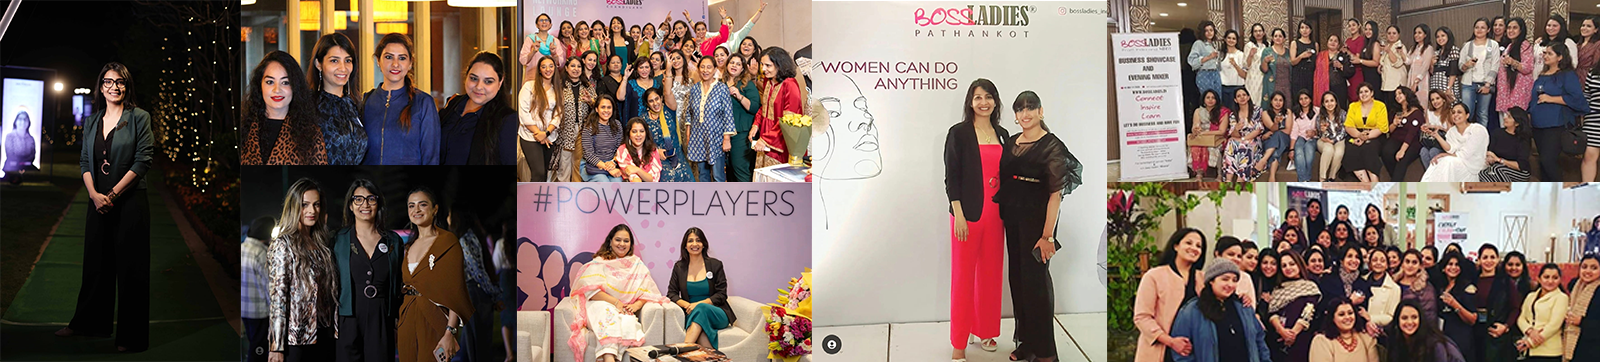 Boss Ladies: Bringing Women Entrepreneurs Together in Tricity And Beyond